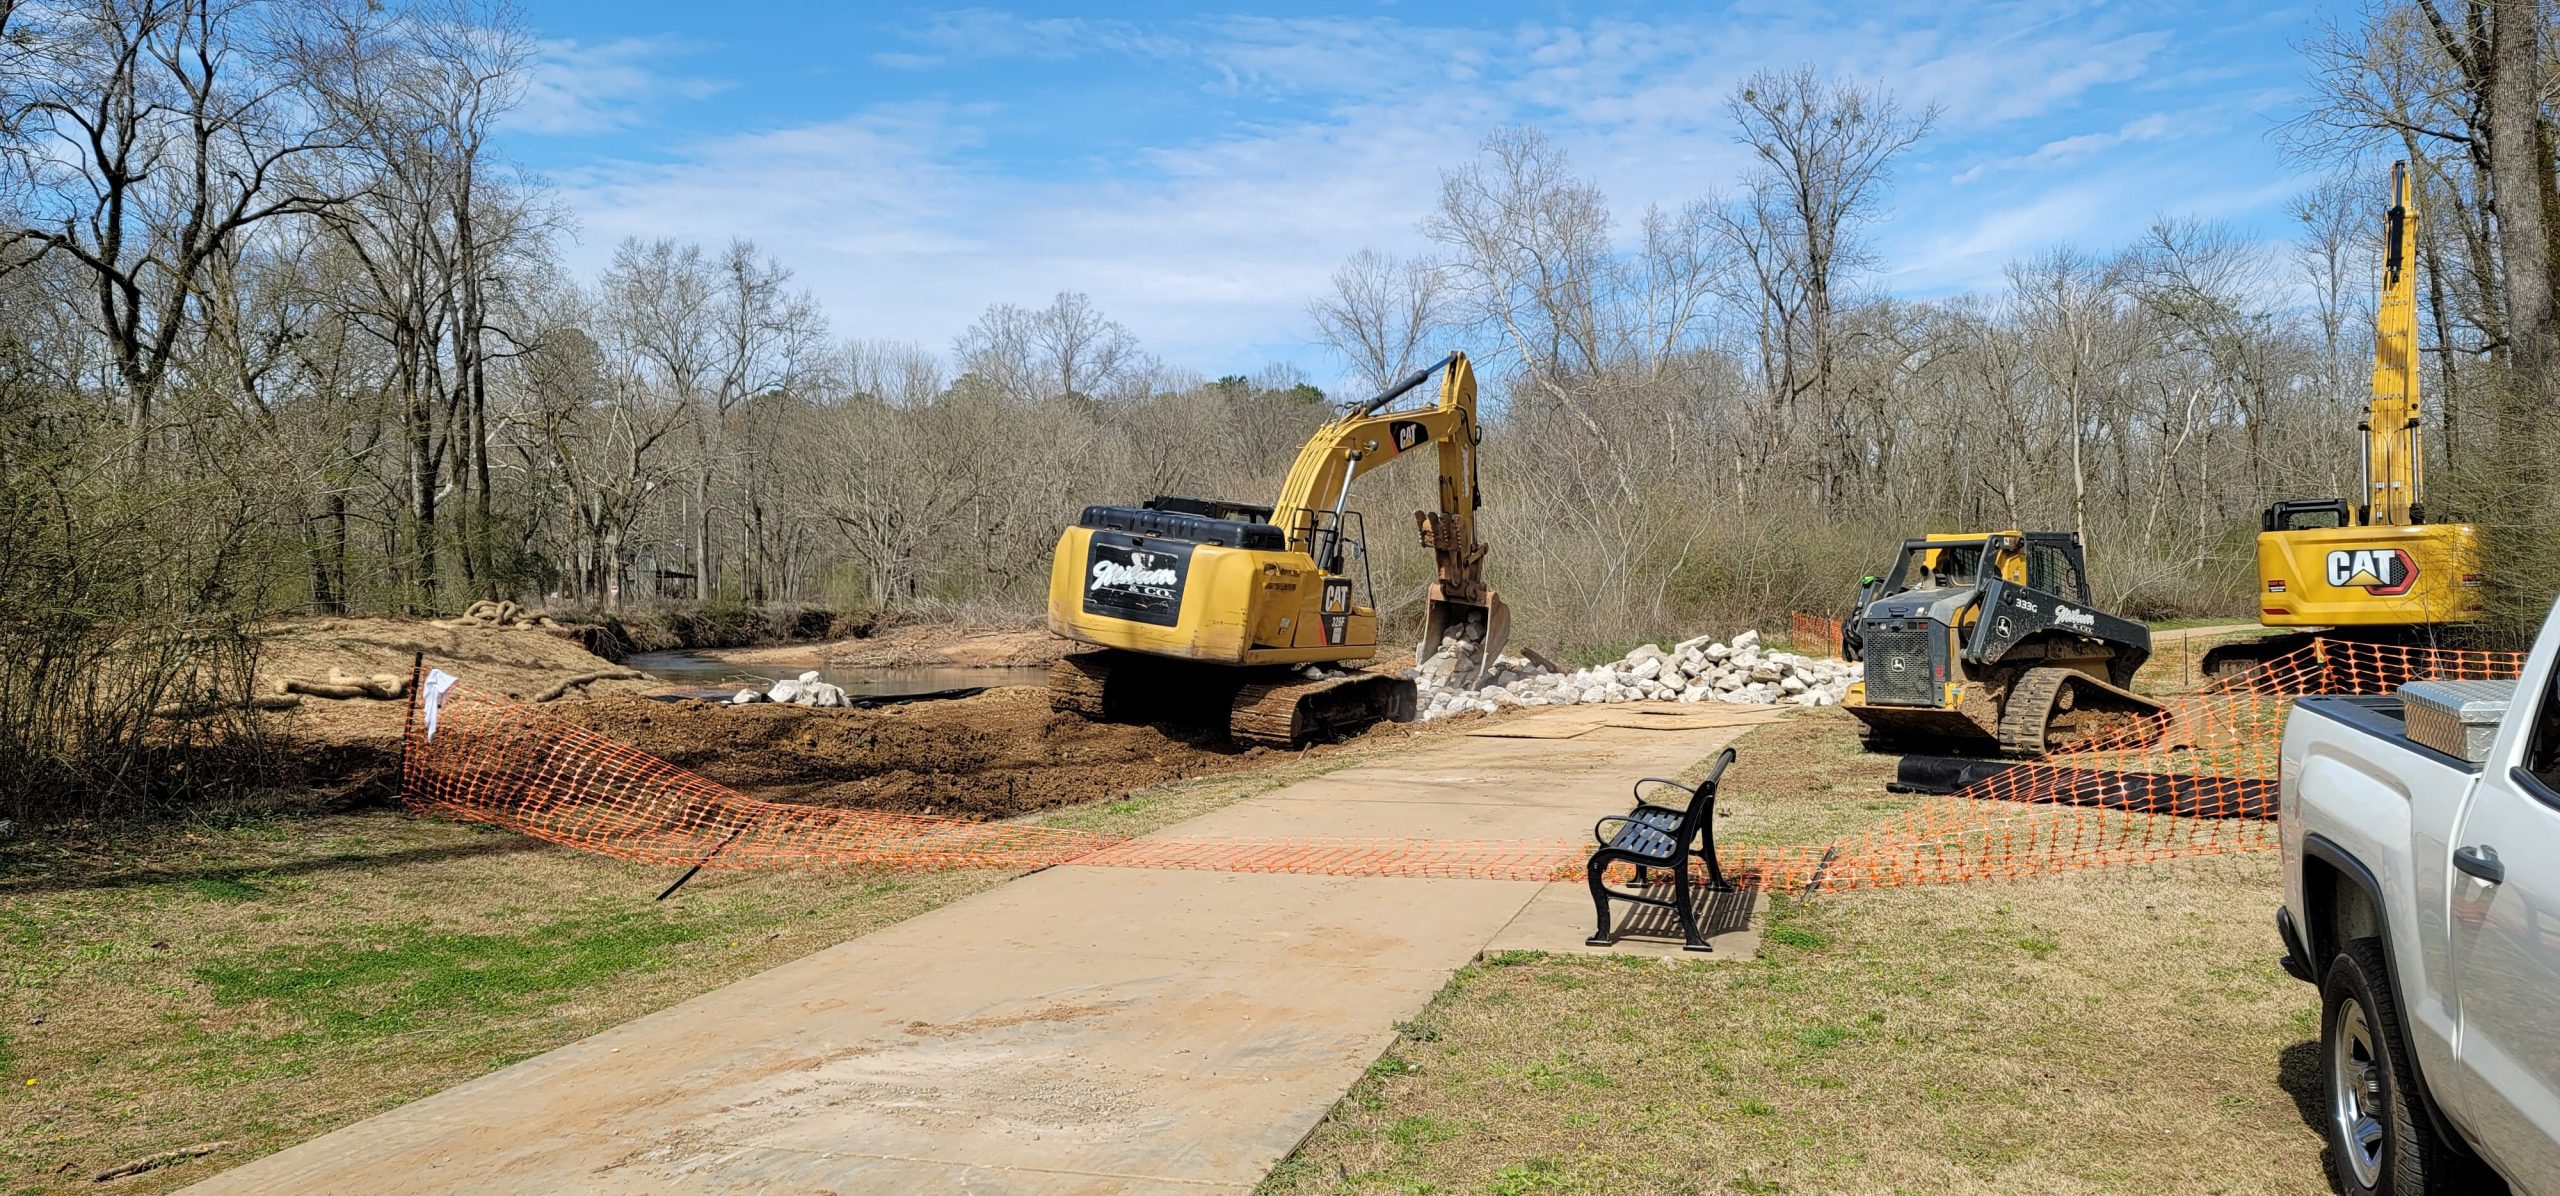 Repairs made on part of Cahaba River threatening Trussville's greenway